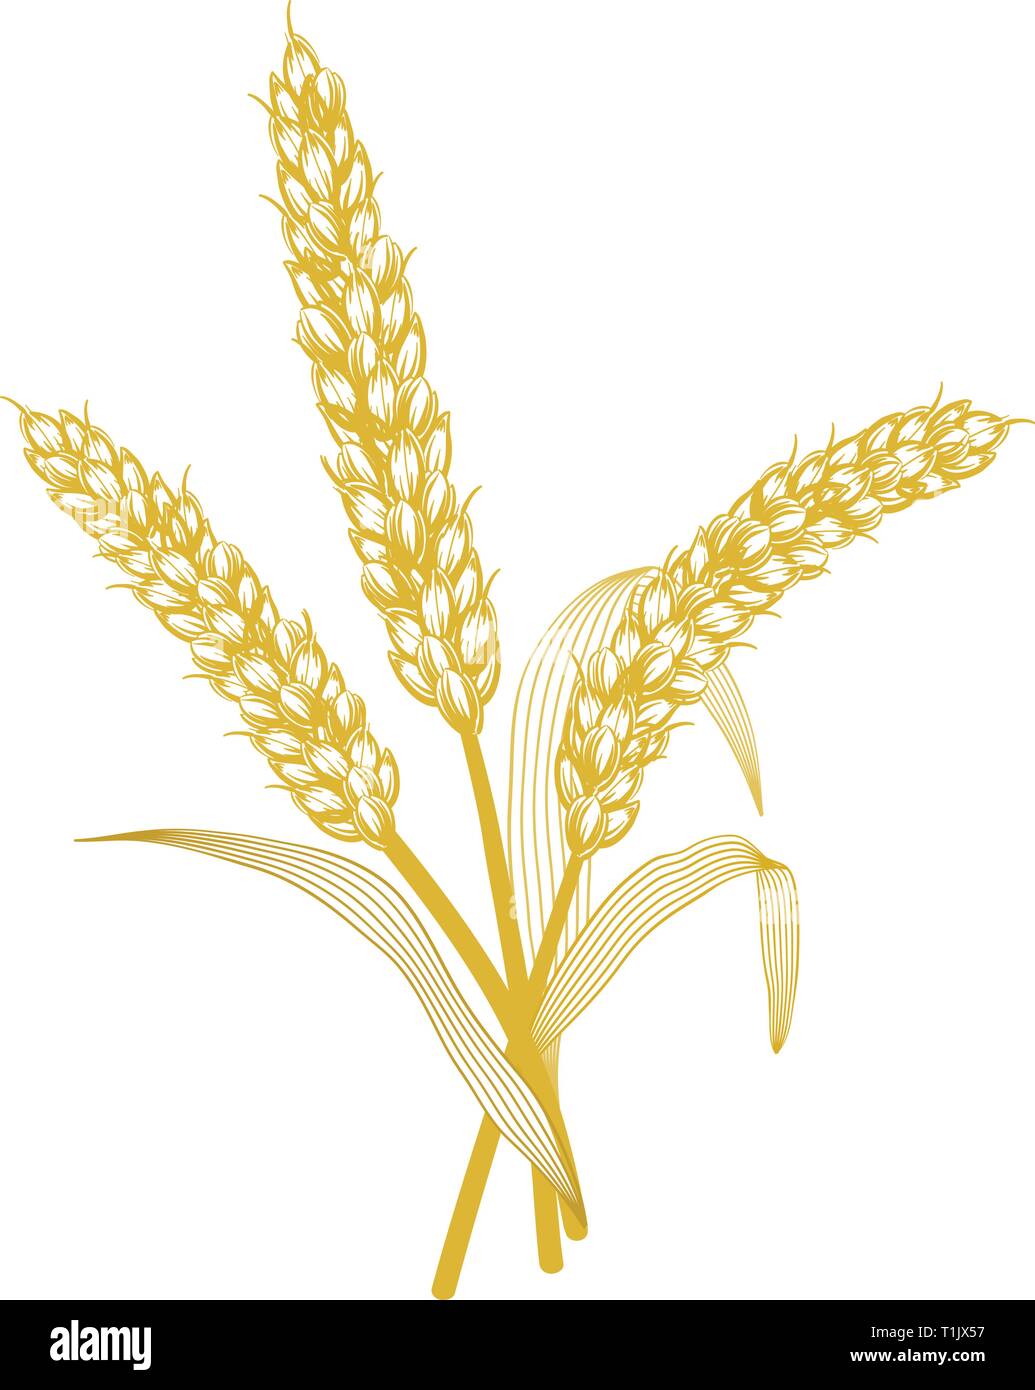 A group or bunch  of wheat grain seeds & leaves Stock Vector